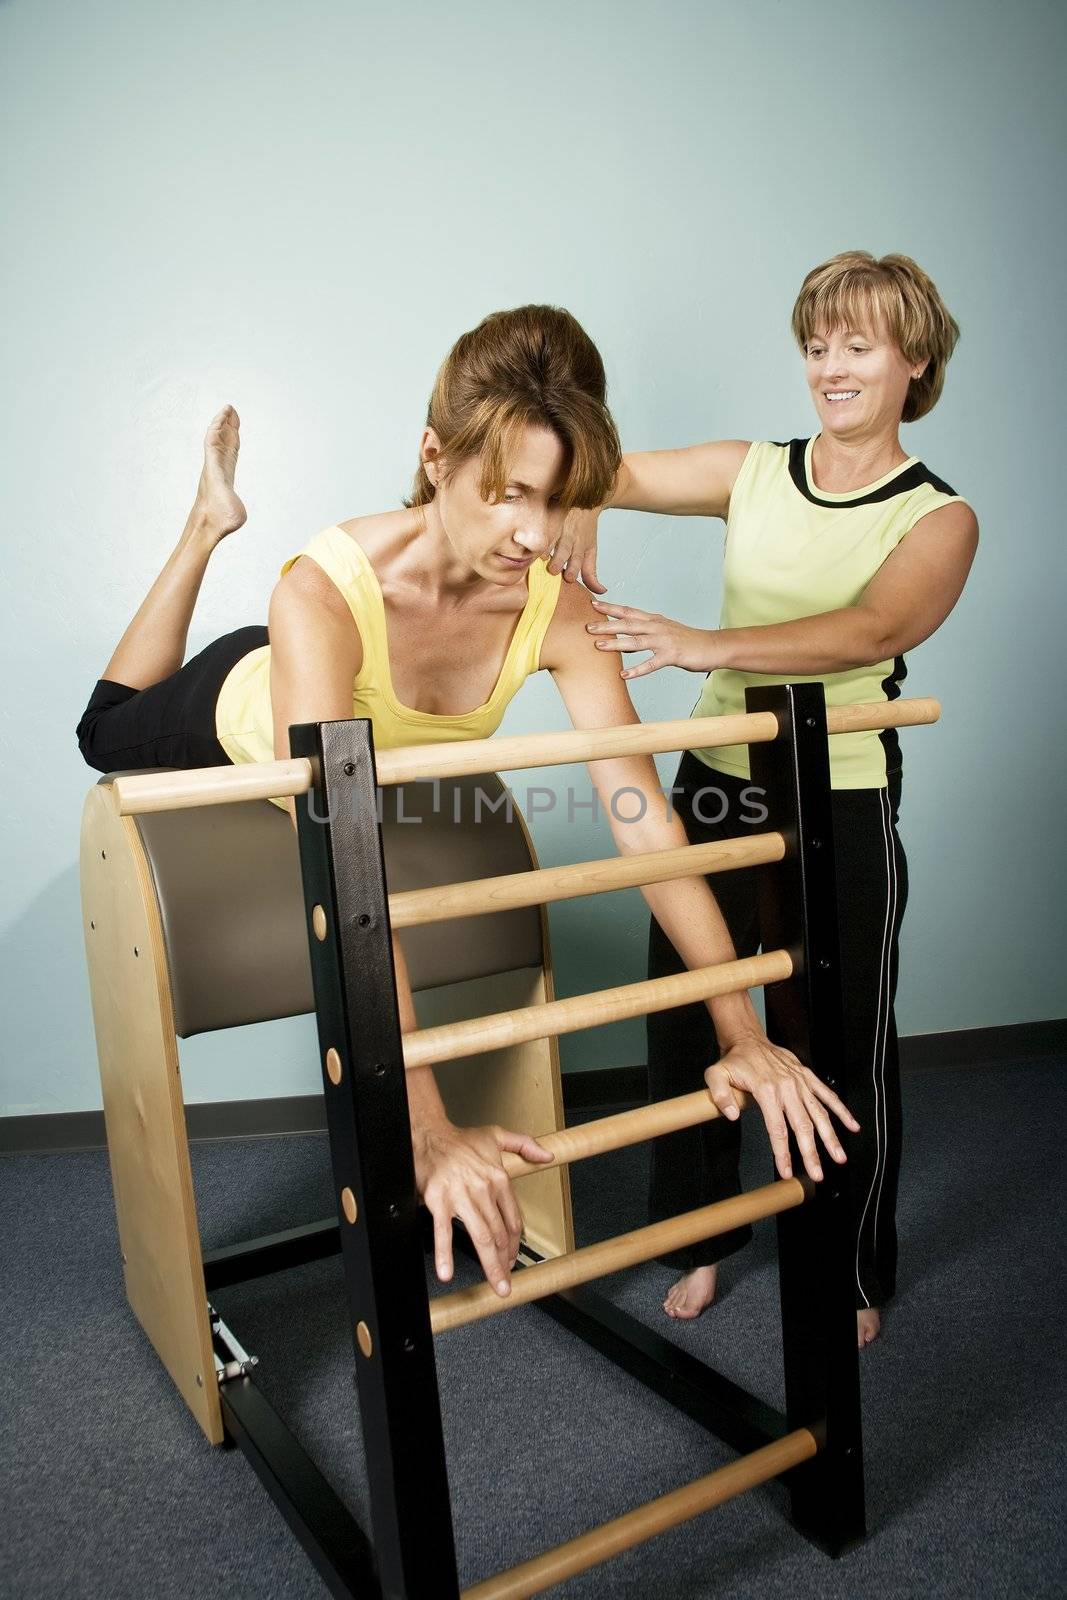 Personal Trainer Supervises a Woman Working Out on Equipment